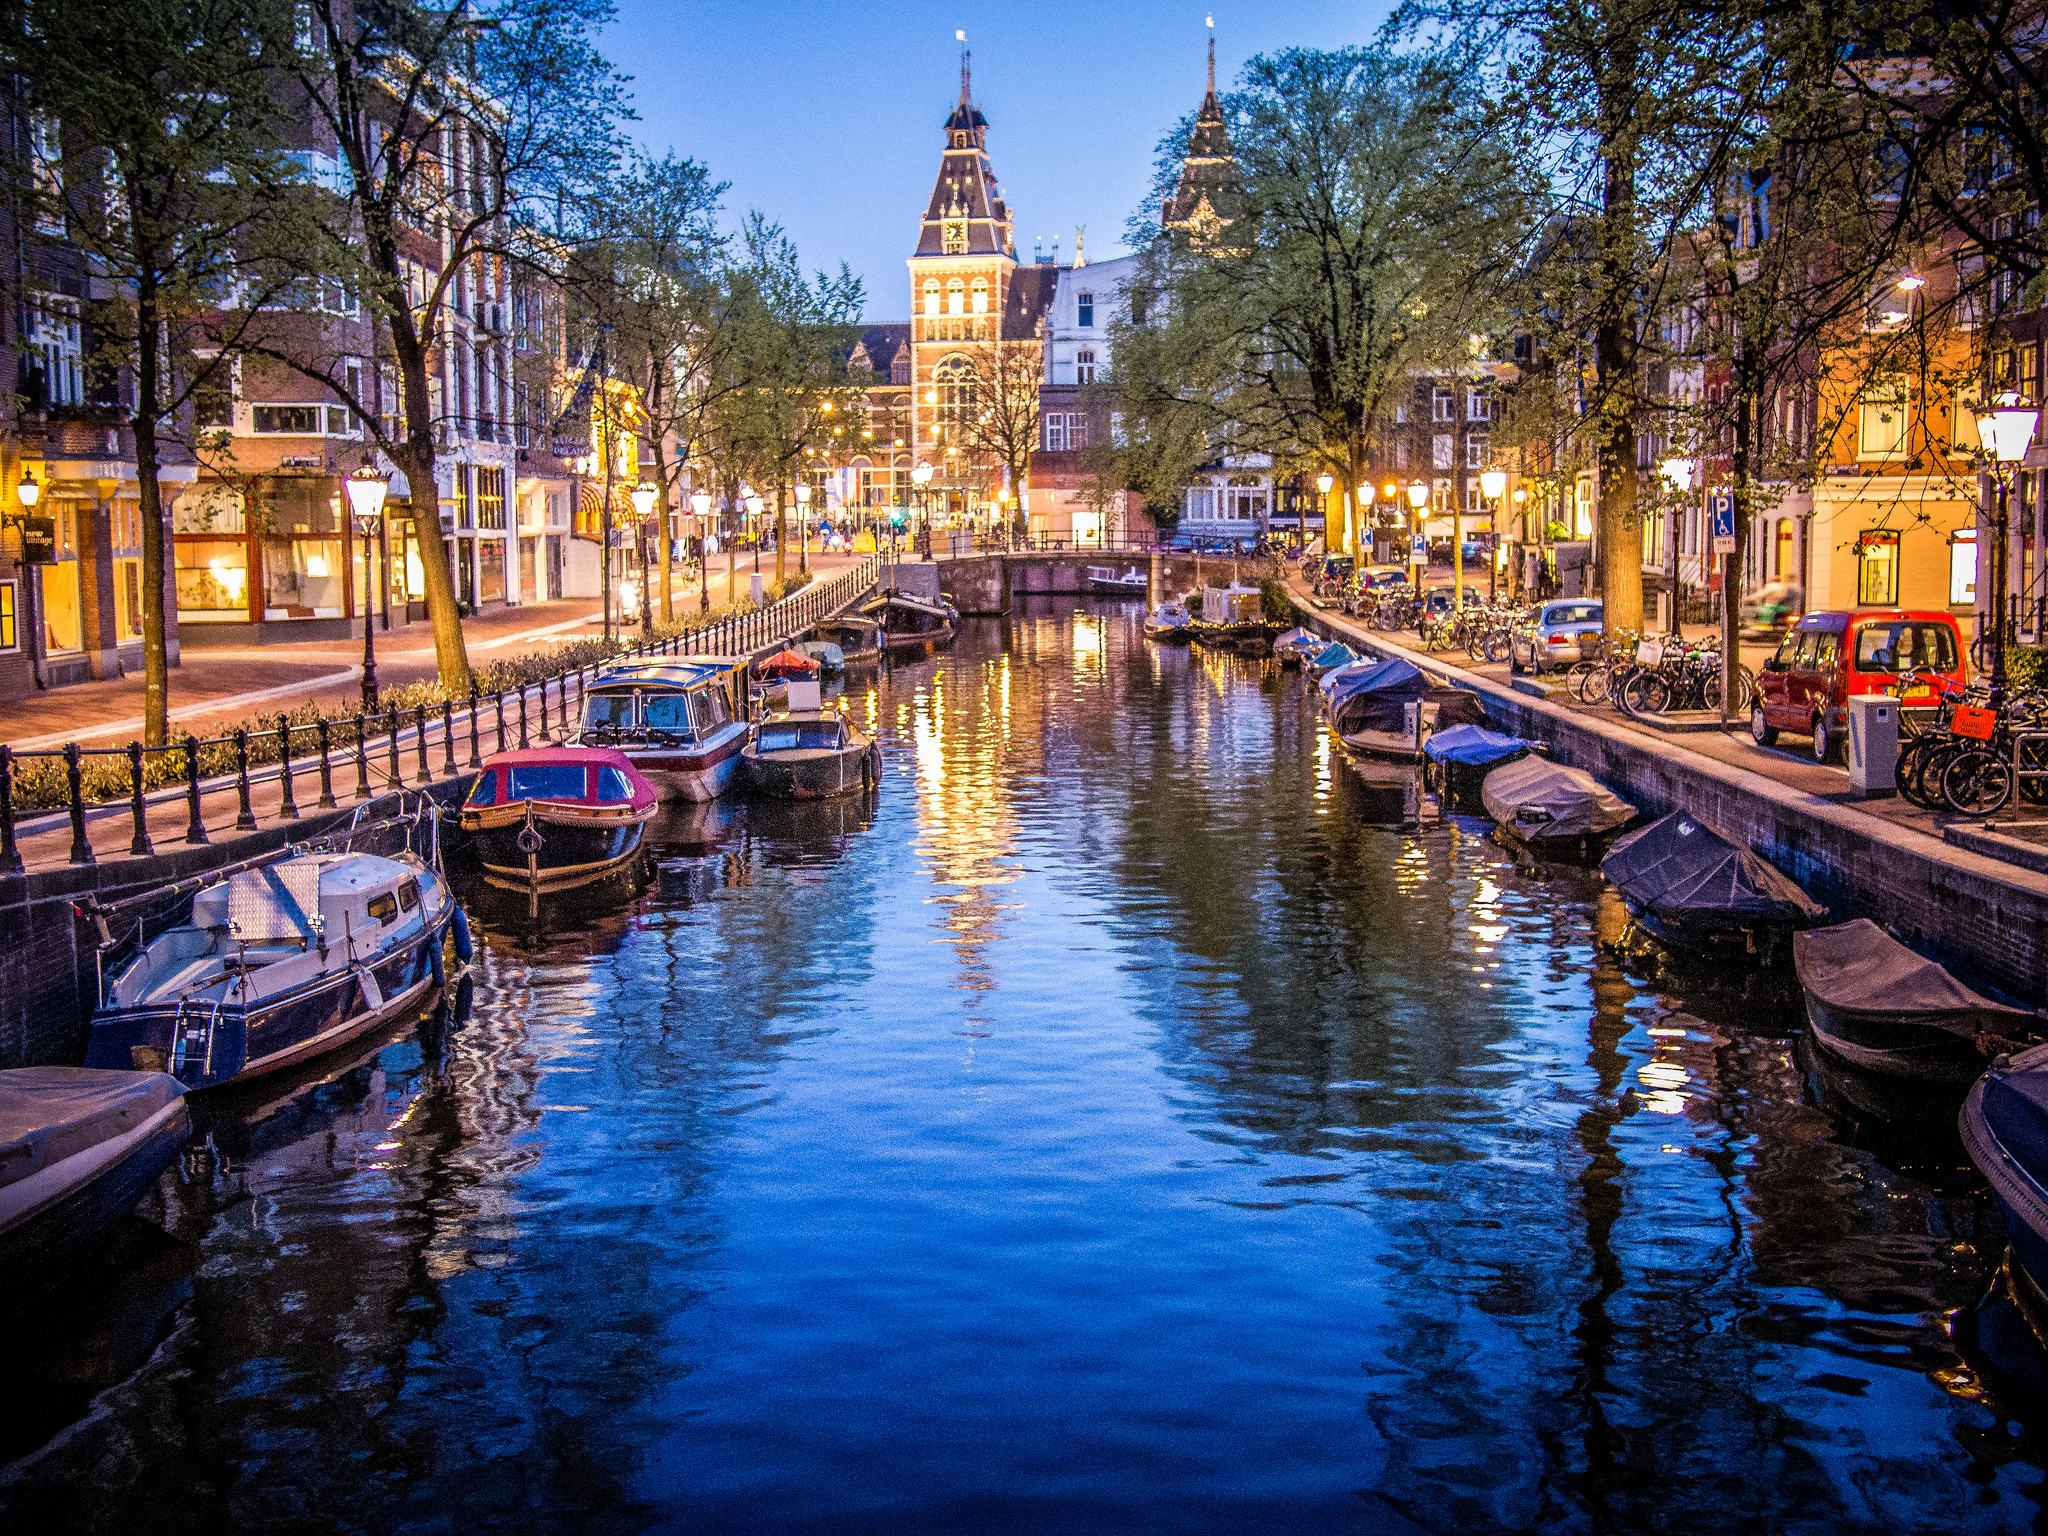 Canals and boats in Amsterdam. Photo via Flickr: Sergey Galyonkin.